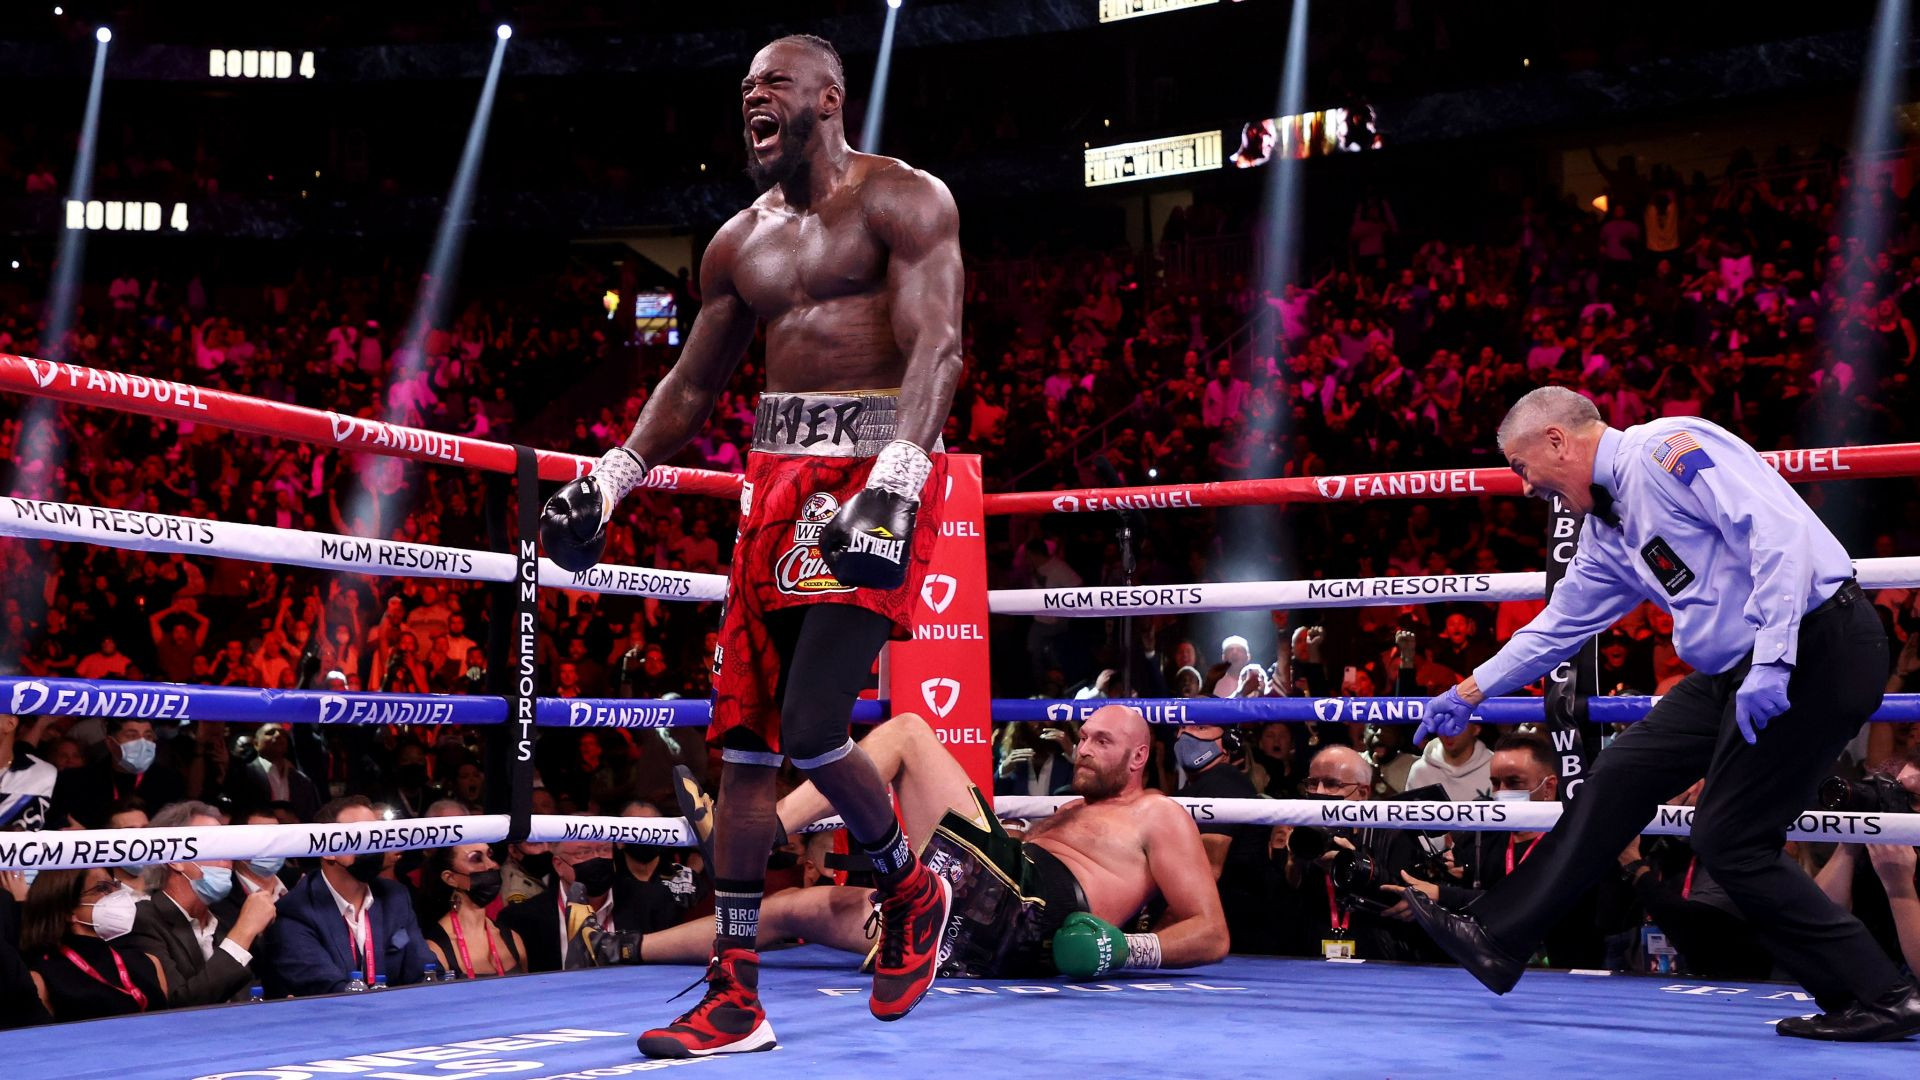 ⁣We used a Stop Watch to Prove Deontay Wilder was CHEATED vs Fury